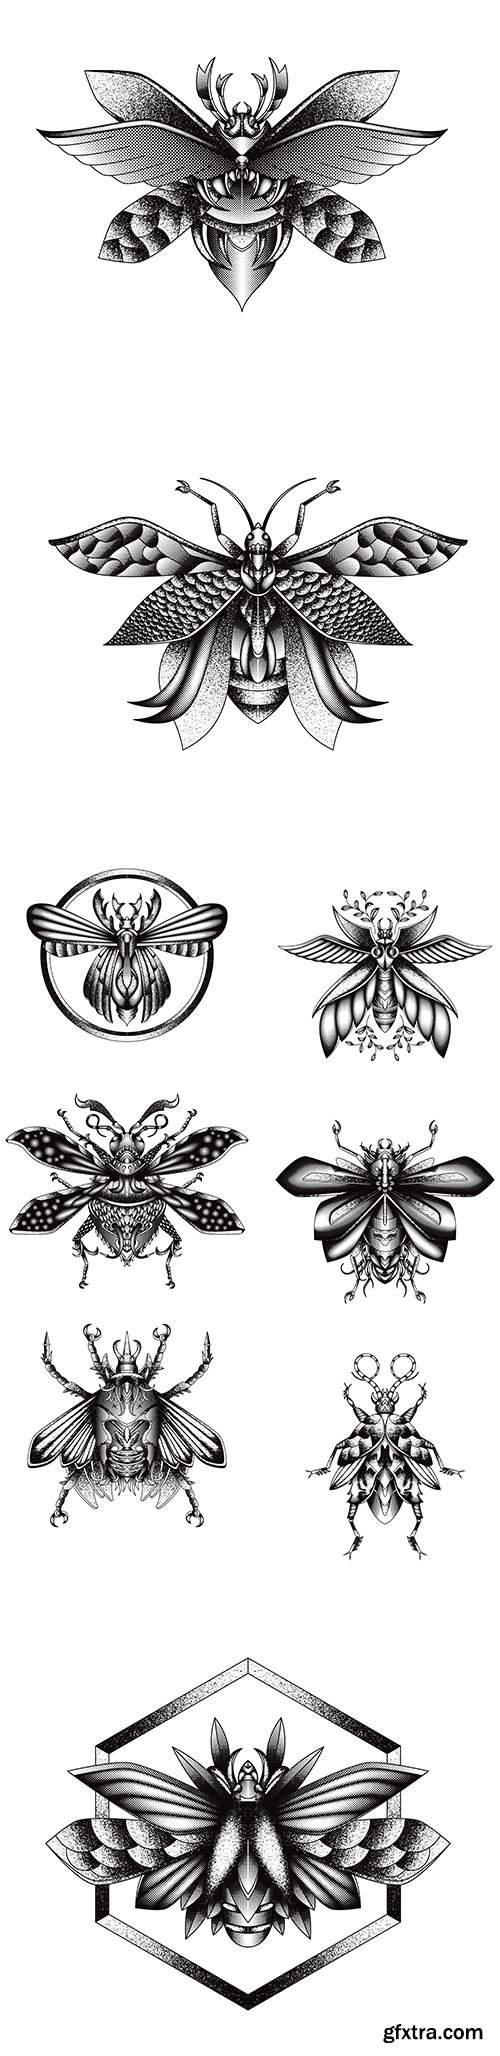 Black and White Abstract Insect Vintage Style